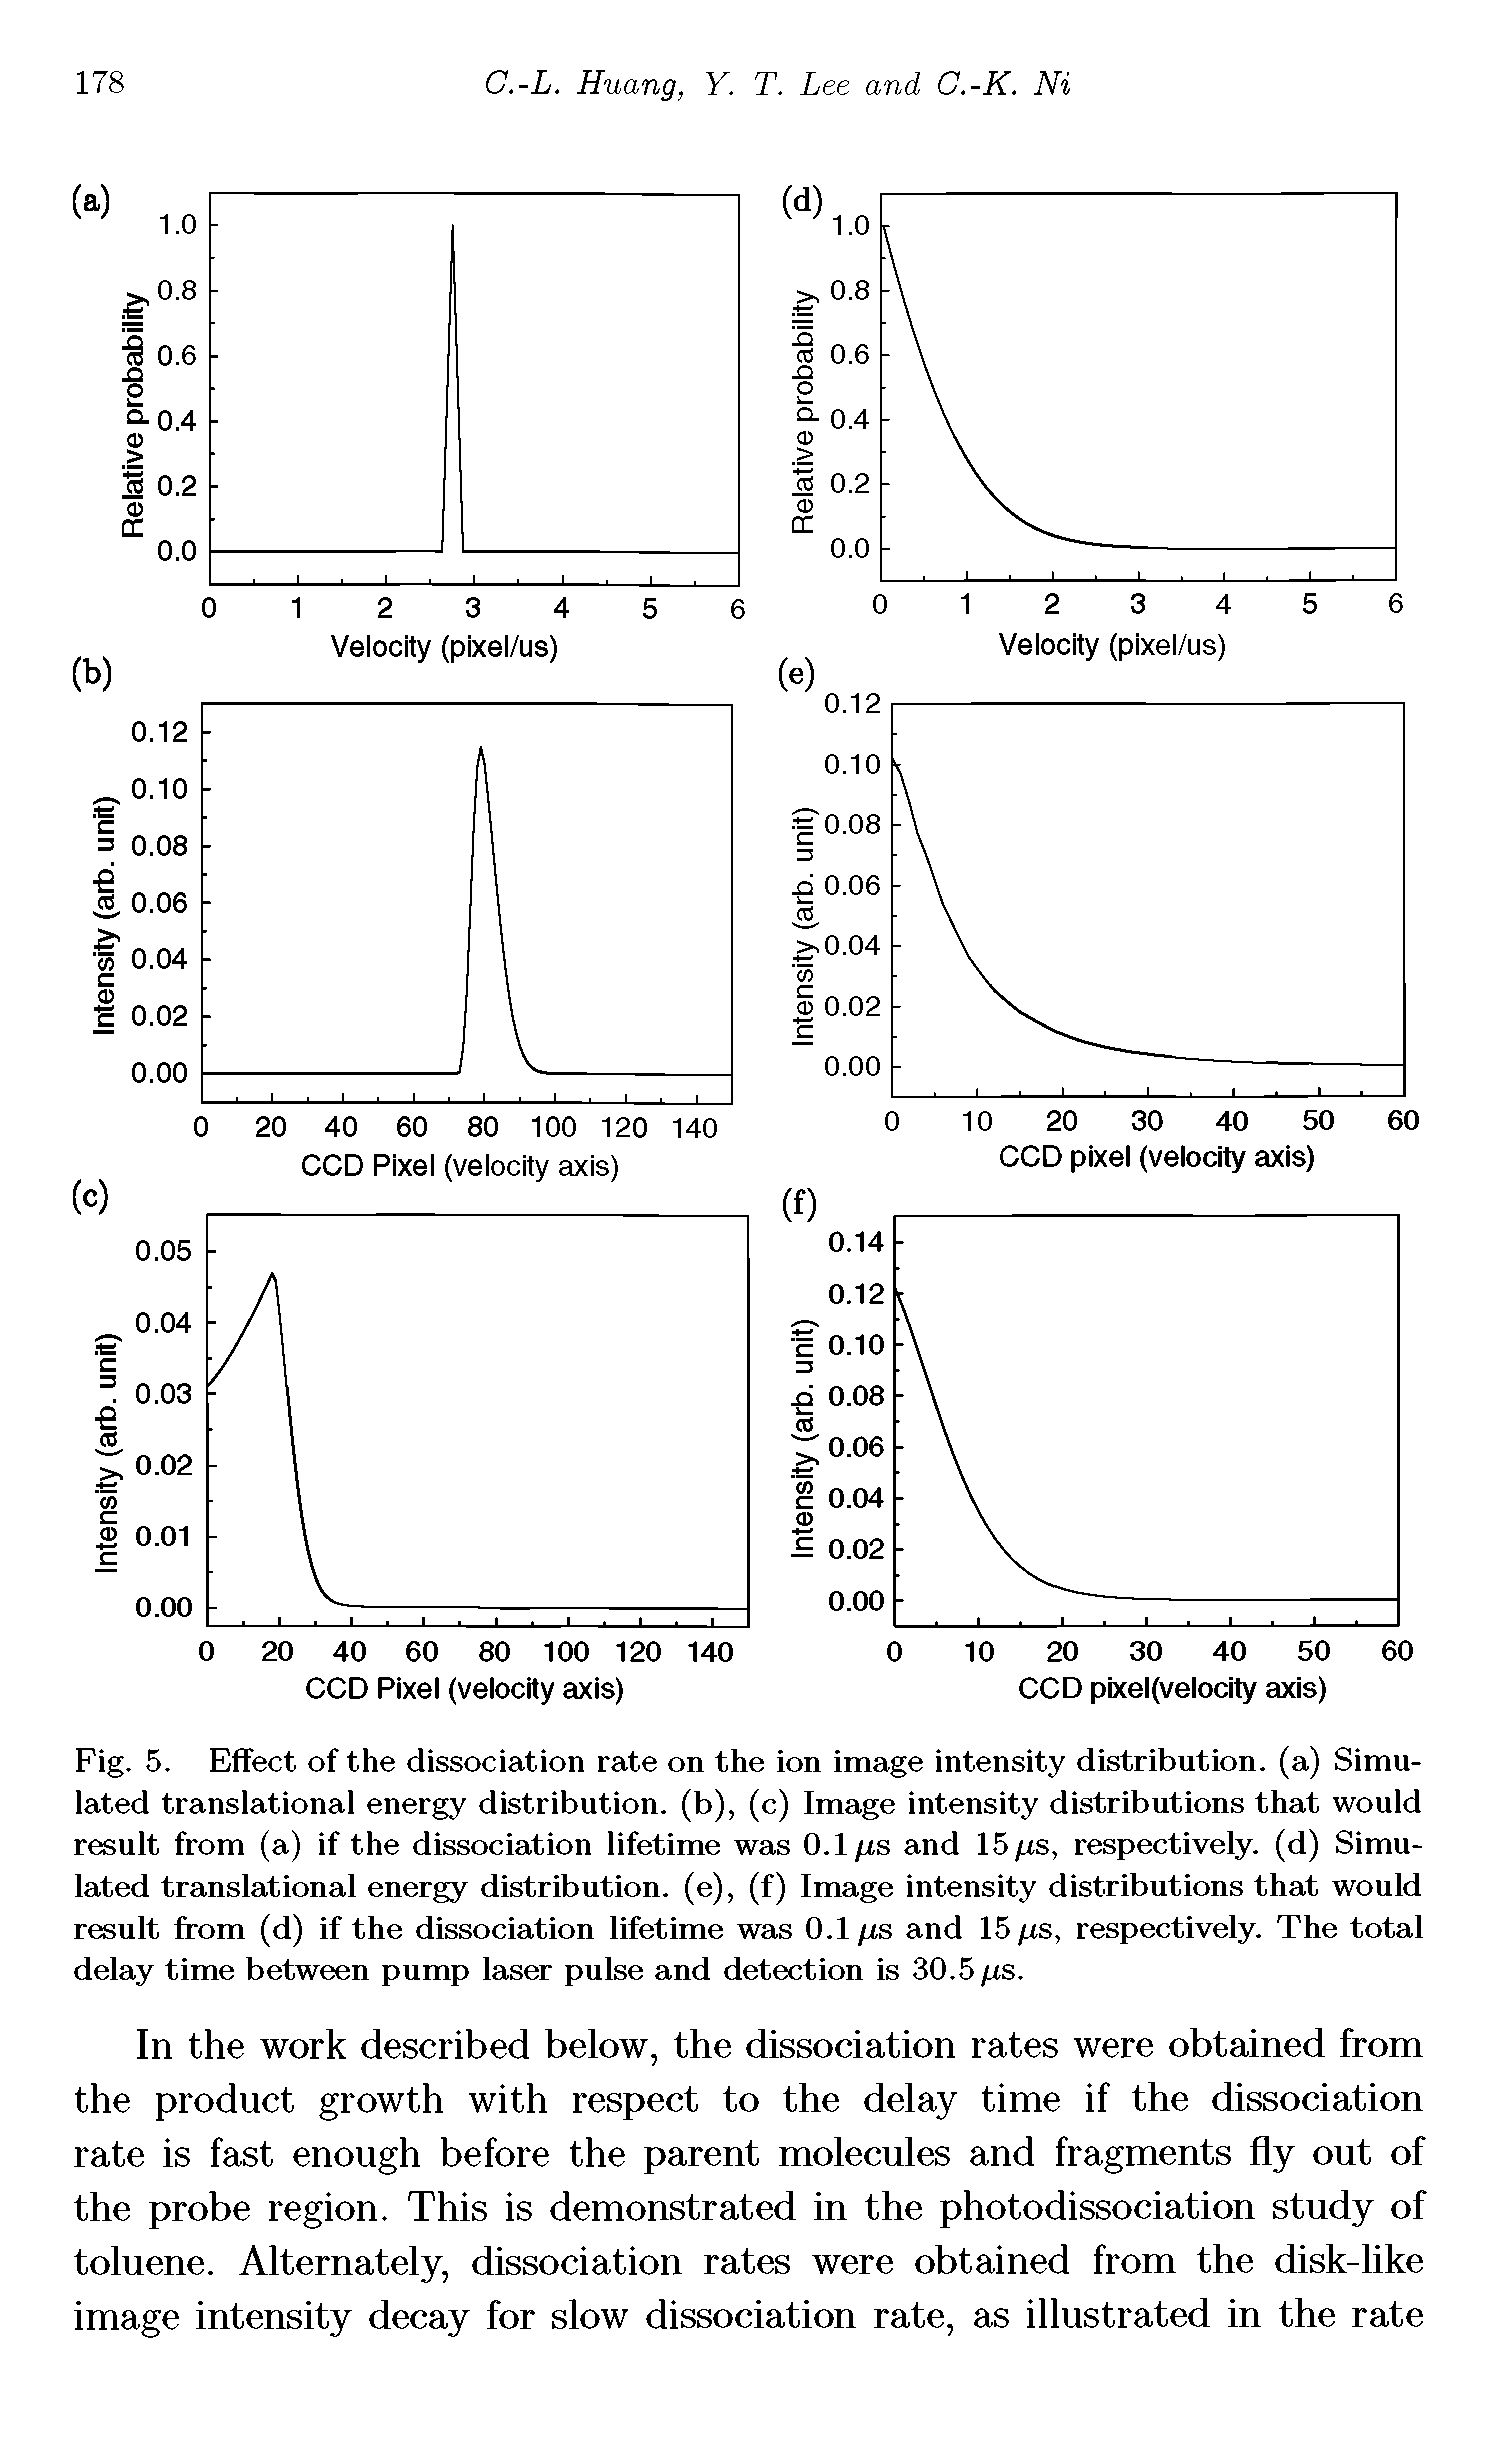 Fig. 5. Effect of the dissociation rate on the ion image intensity distribution, (a) Simulated translational energy distribution, (b), (c) Image intensity distributions that would result from (a) if the dissociation lifetime was 0.1/rs and 15/l<s, respectively, (d) Simulated translational energy distribution, (e), (f) Image intensity distributions that would result from (d) if the dissociation lifetime was 0.1 //s and 15 [is, respectively. The total delay time between pump laser pulse and detection is 30.5 [is.